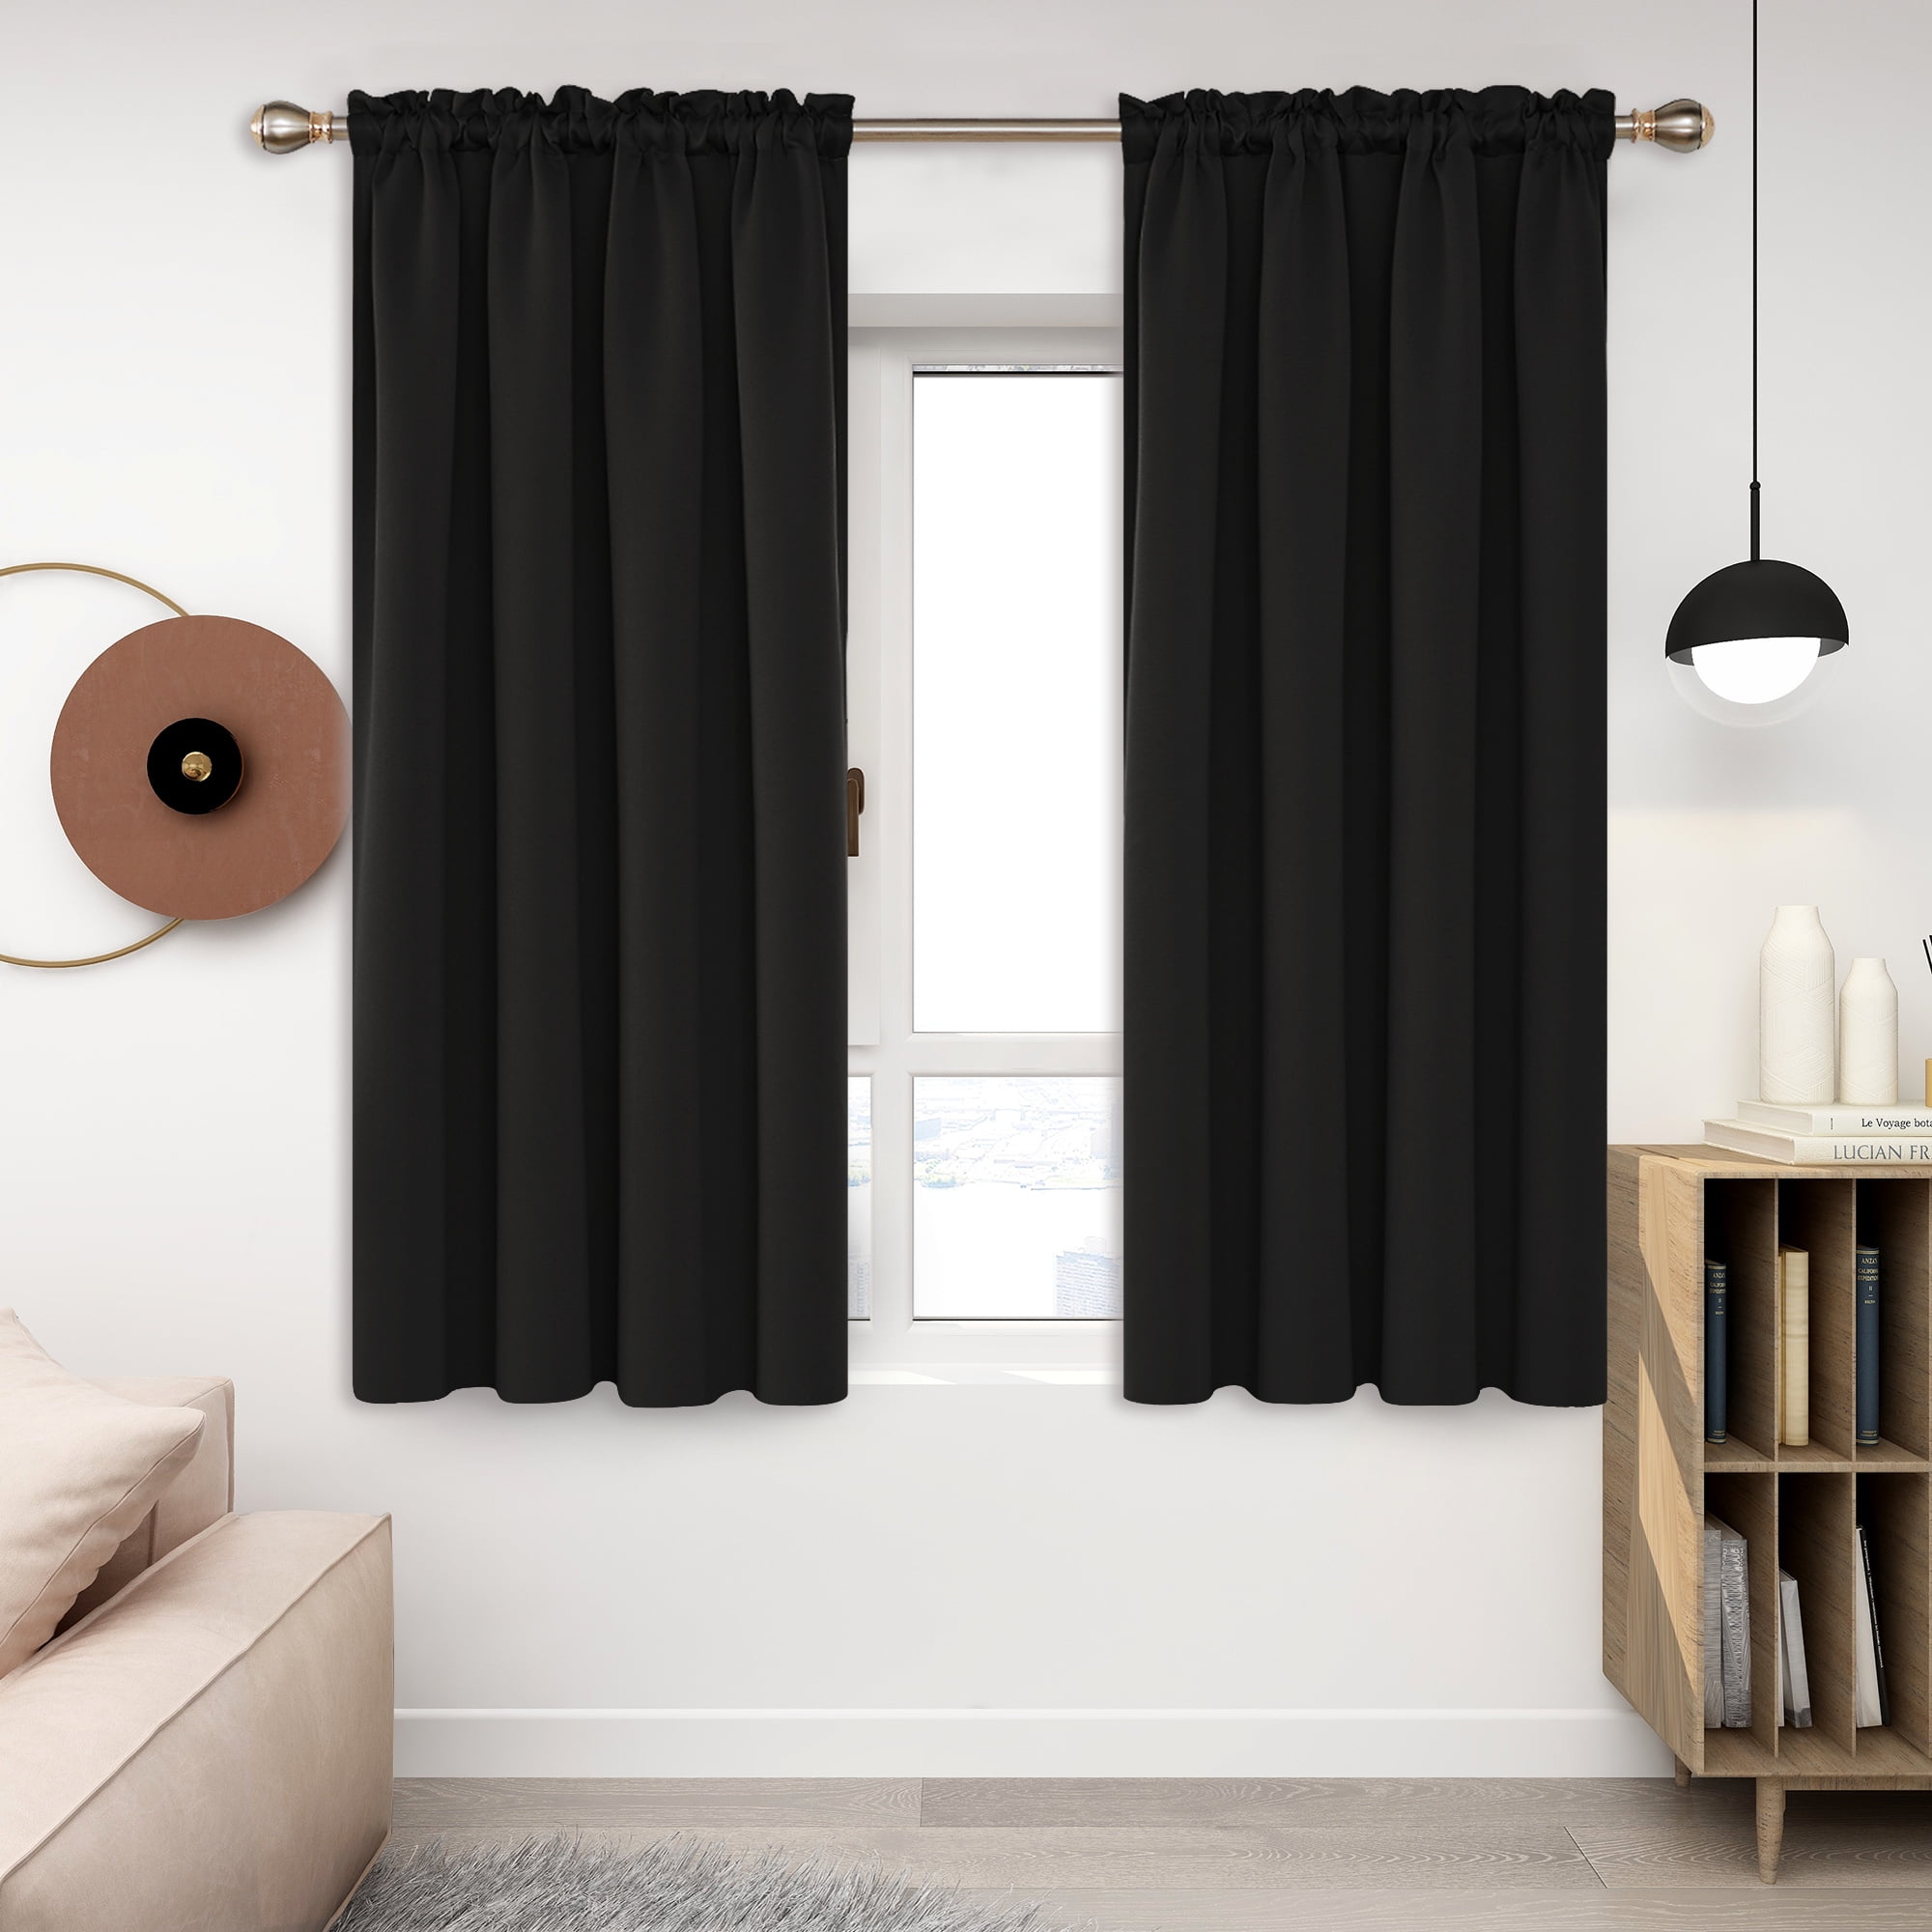 52 x 18 Inch Grey Kitchen Blackout Valances for Windows Kids Room Window Treatments Thermal Insulated Rod Pocket Valance Curtains Room Darkening Cafe Drapes and Curtains for Nursery Living Room 